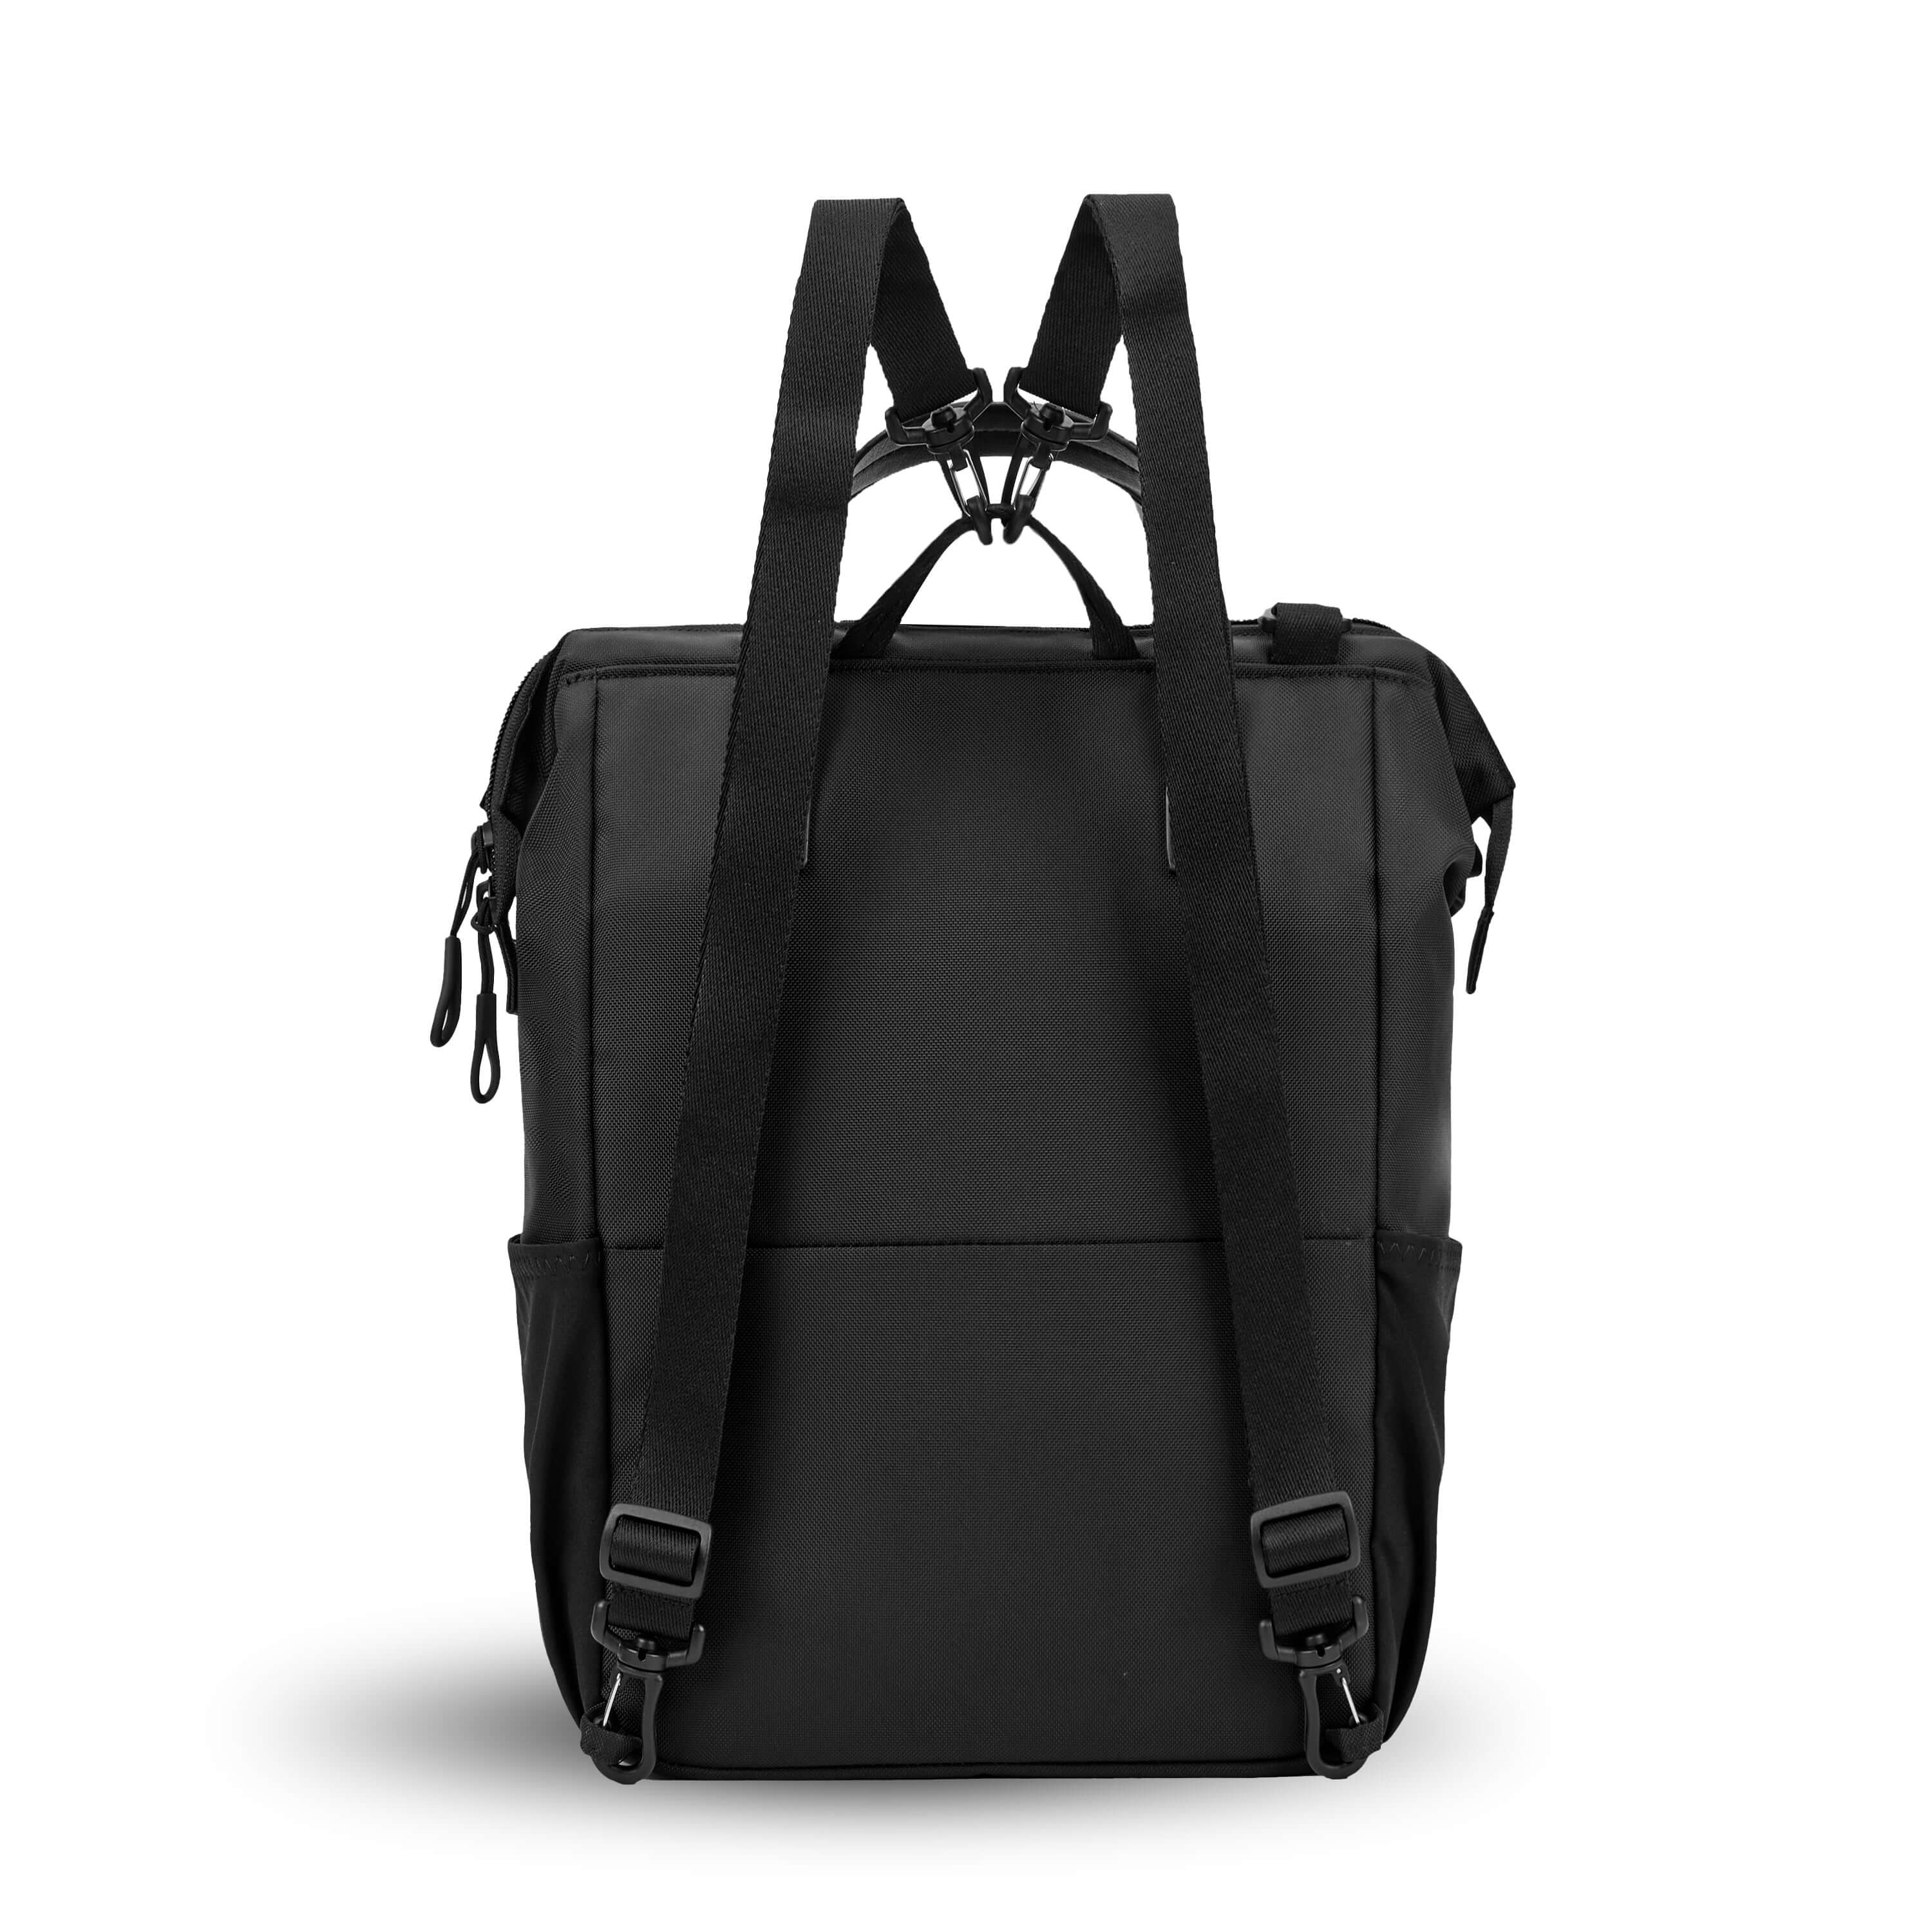 Back view of Sherpani three-in-one bag, the Dispatch in Raven. The detachable straps are shown in the backpack style.